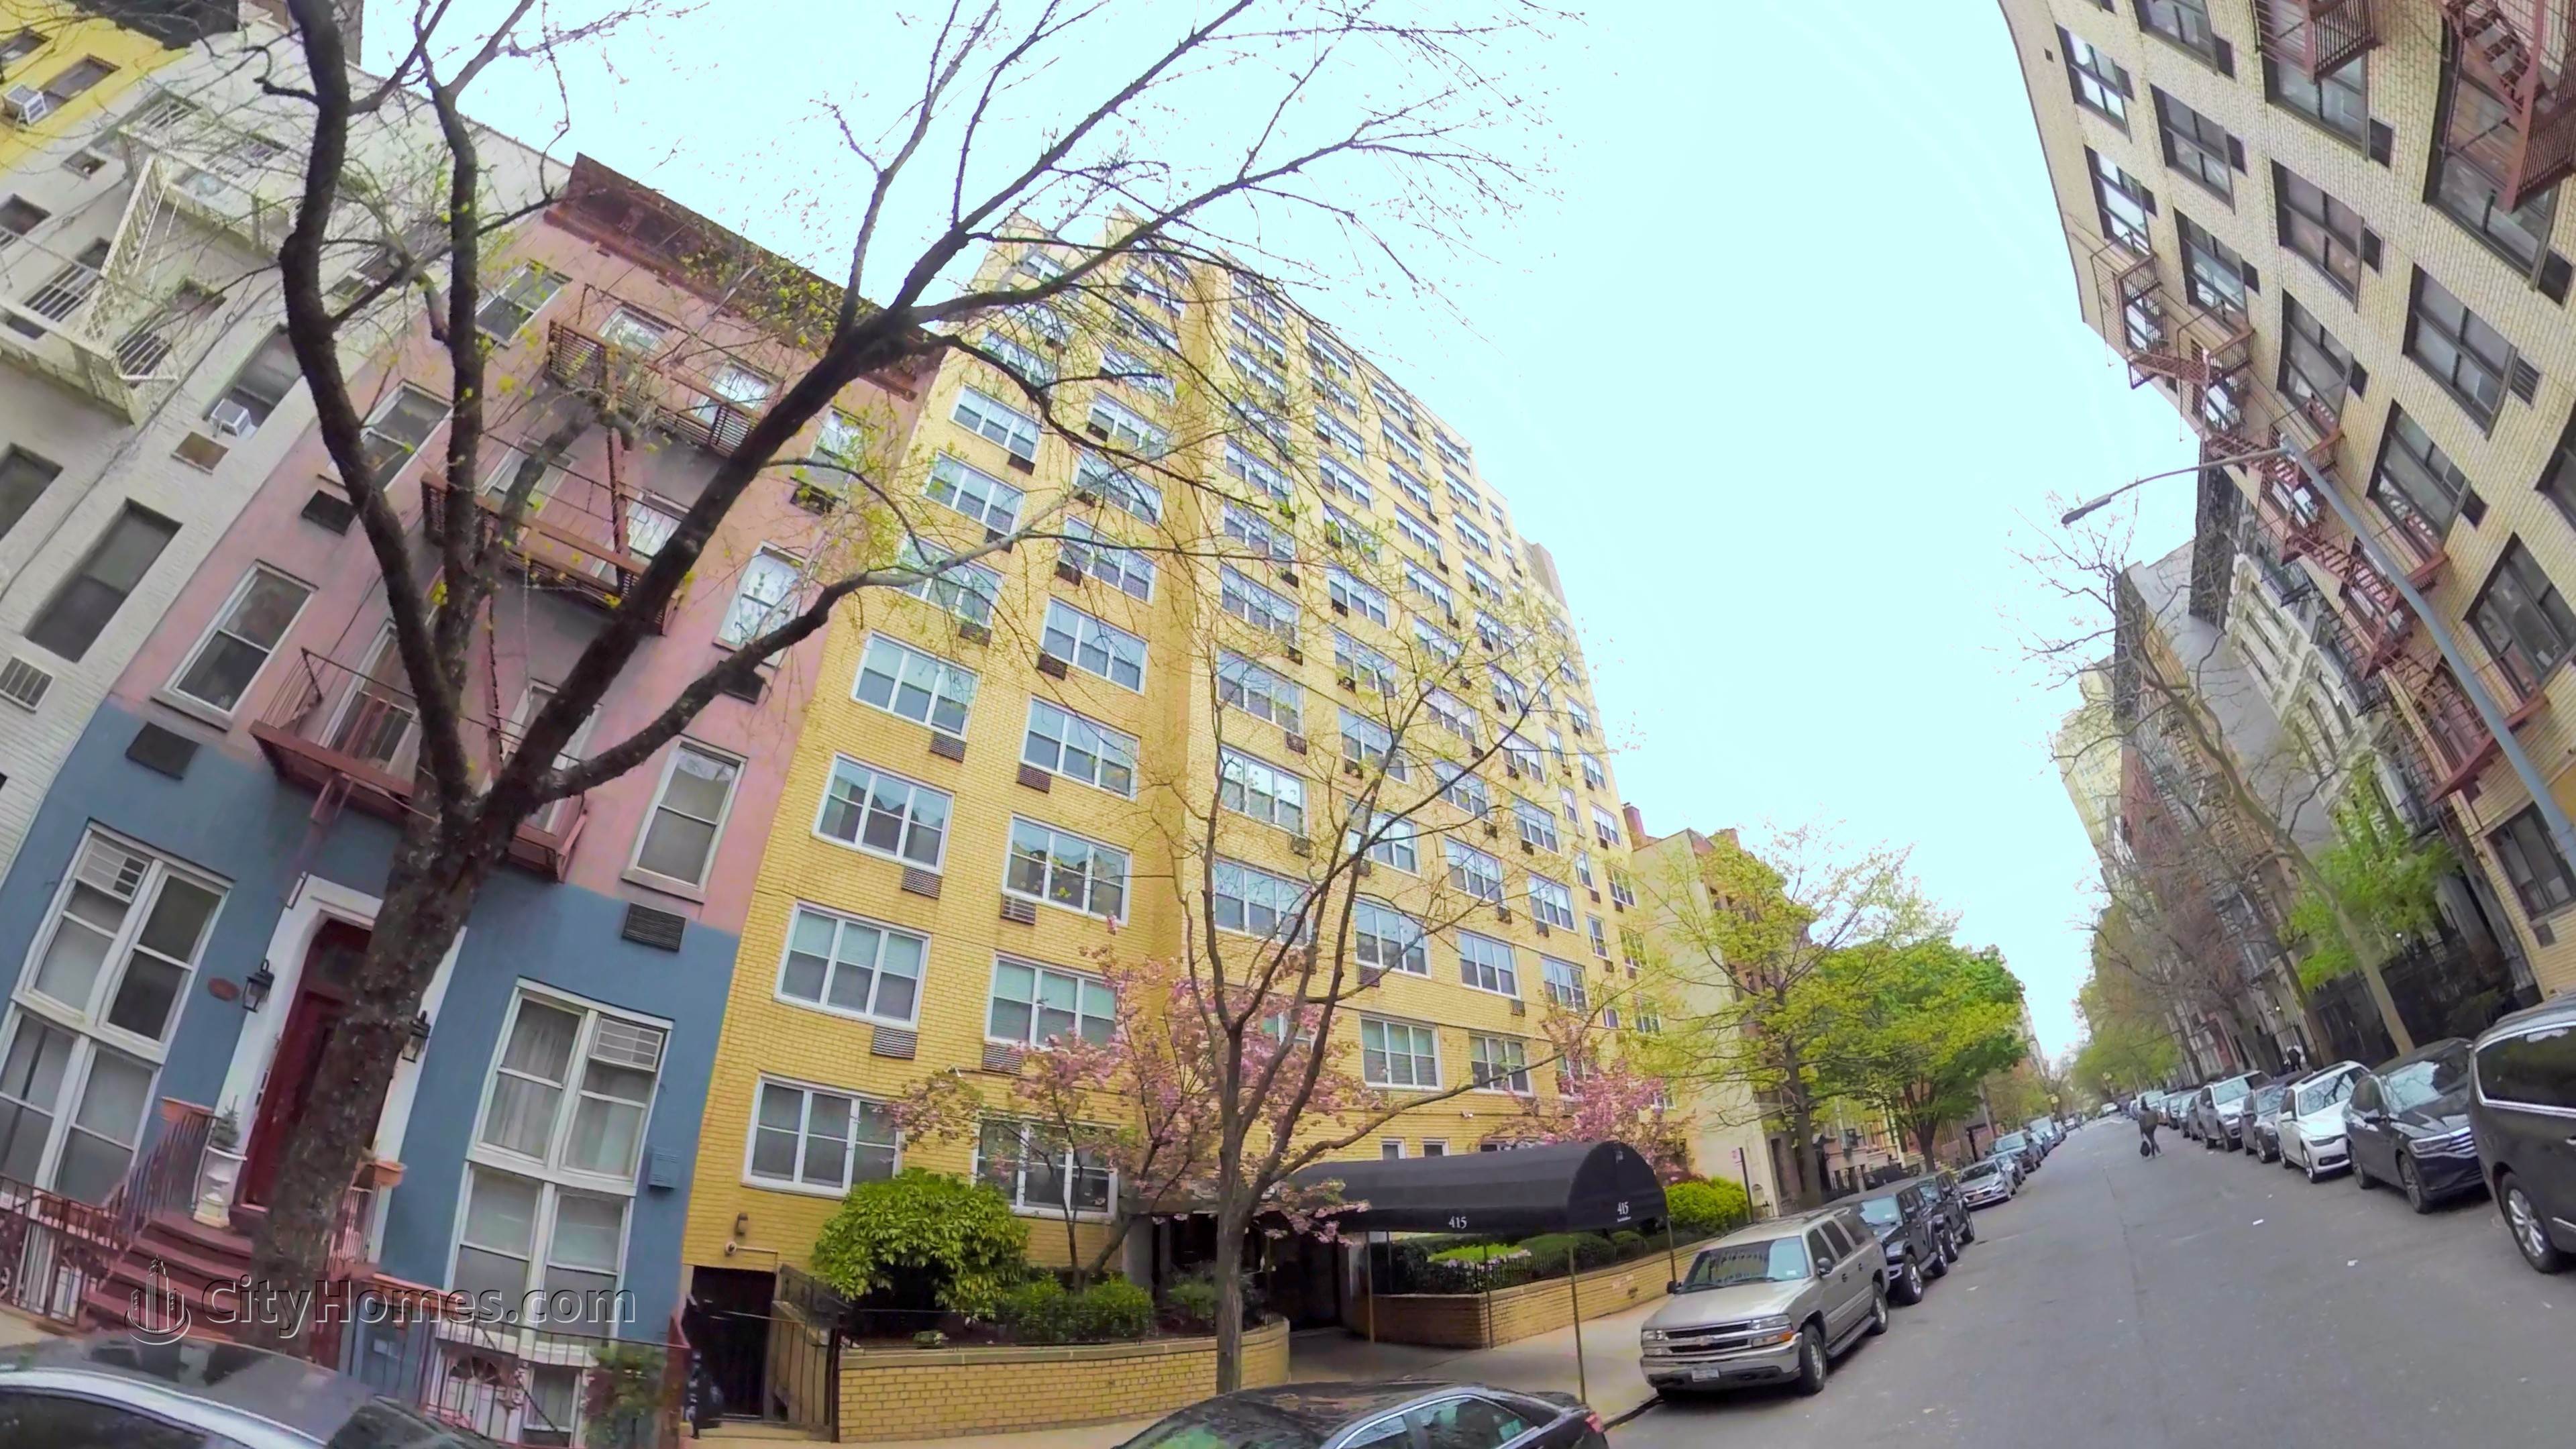 3. xây dựng tại 415 East 85th Street, Yorkville, Manhattan, NY 10028